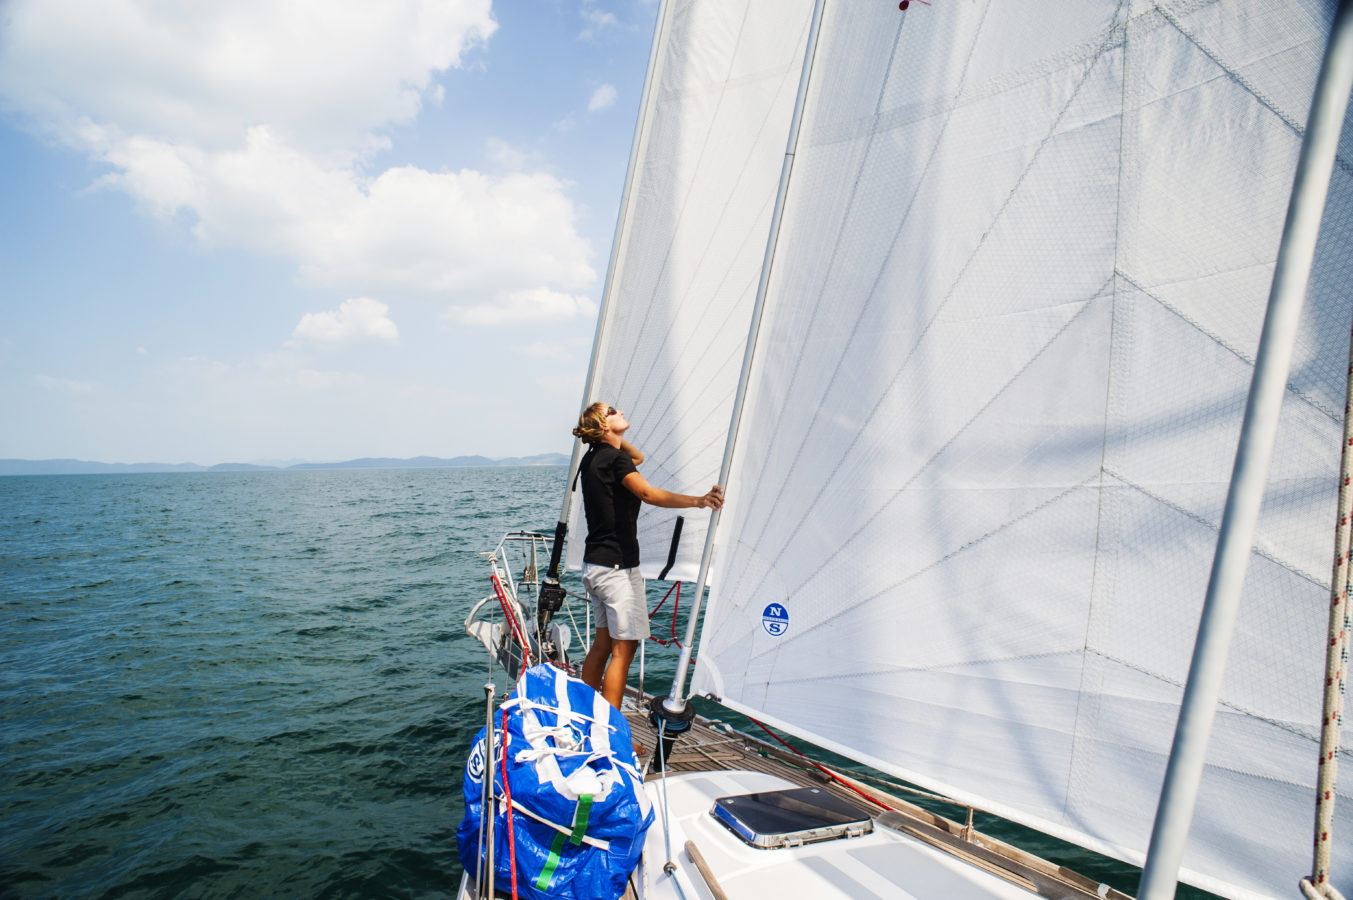 SAIL HANDLING SYSTEMS: WHAT YOU NEED TO KNOW